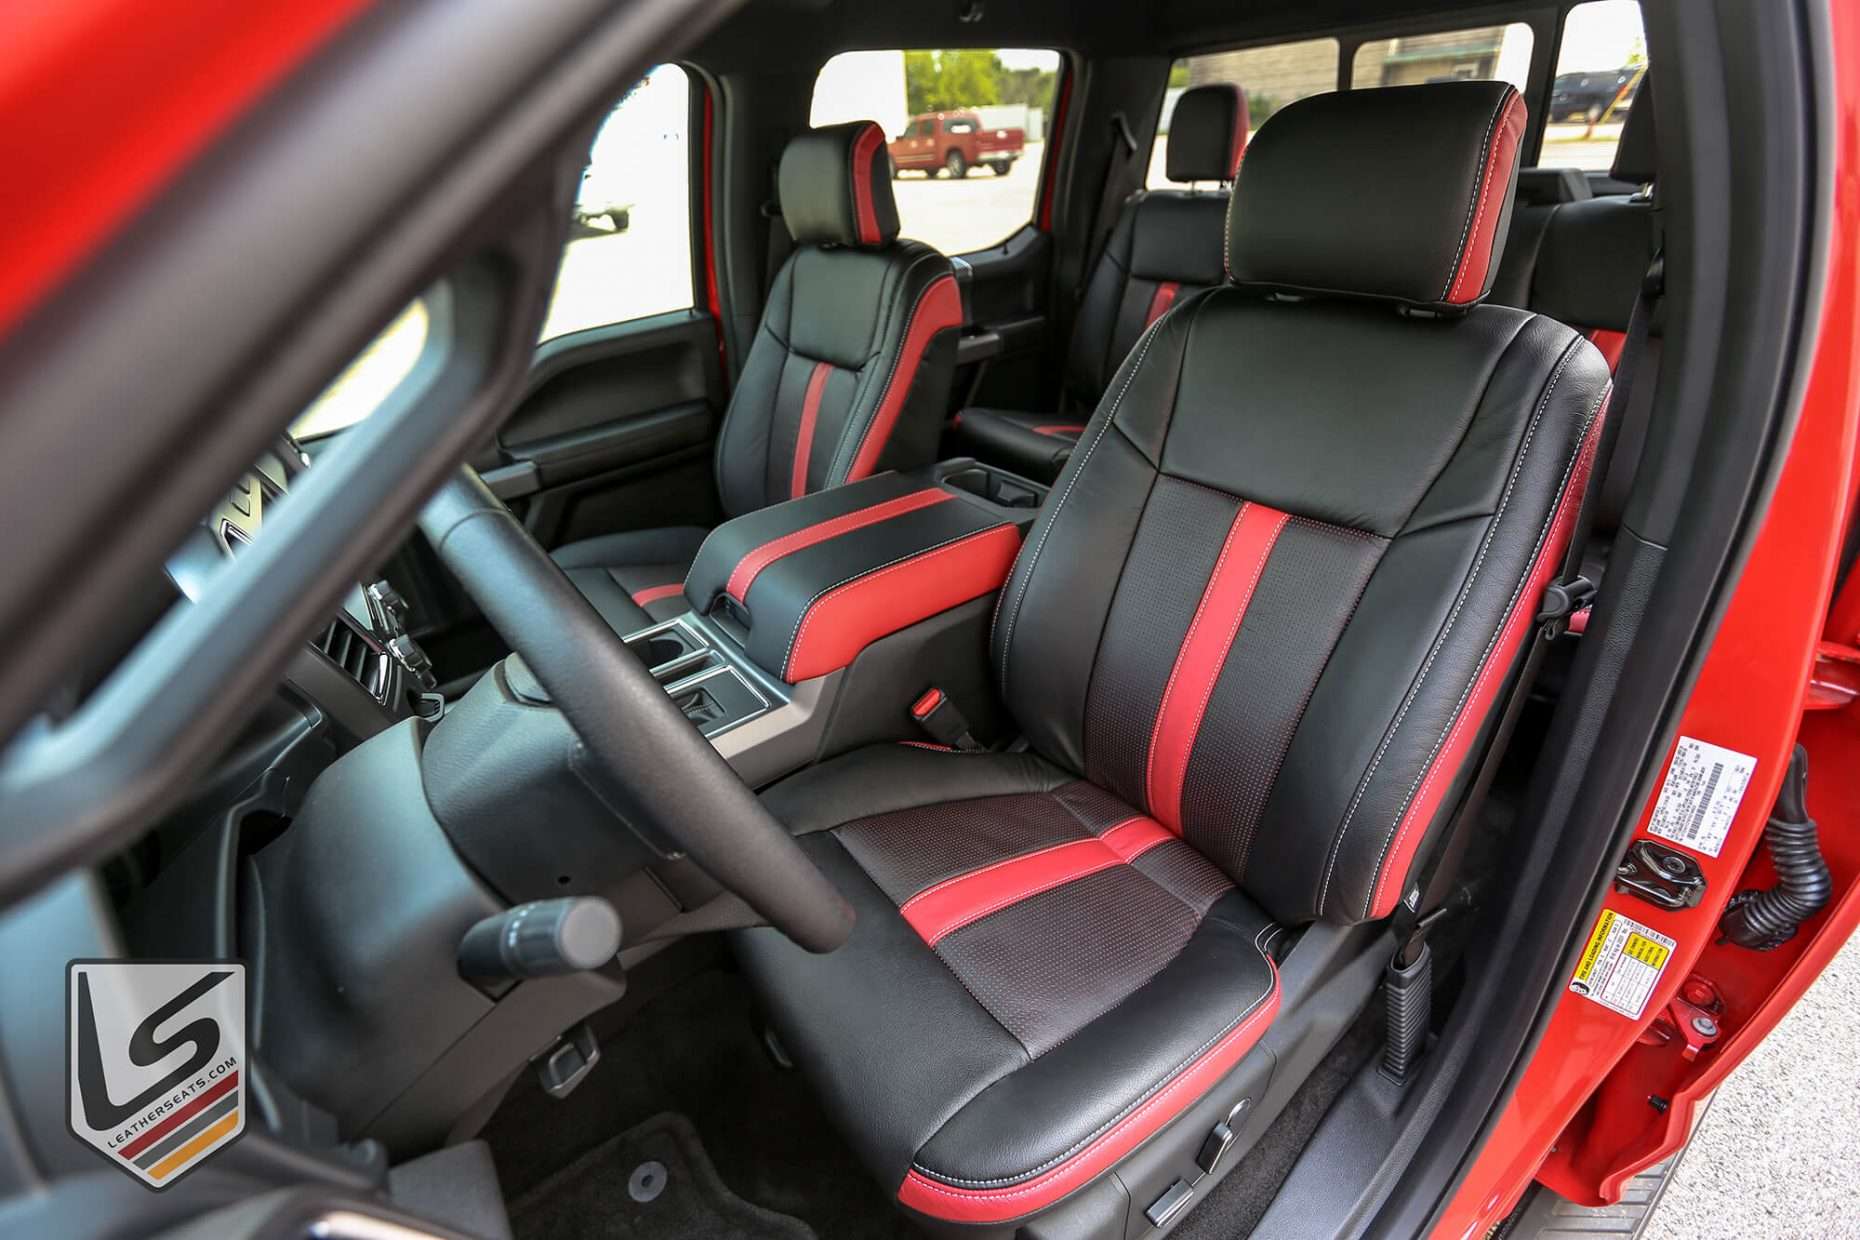 Ford F-150 leather seats in Black/Piazza Red/Bright Red